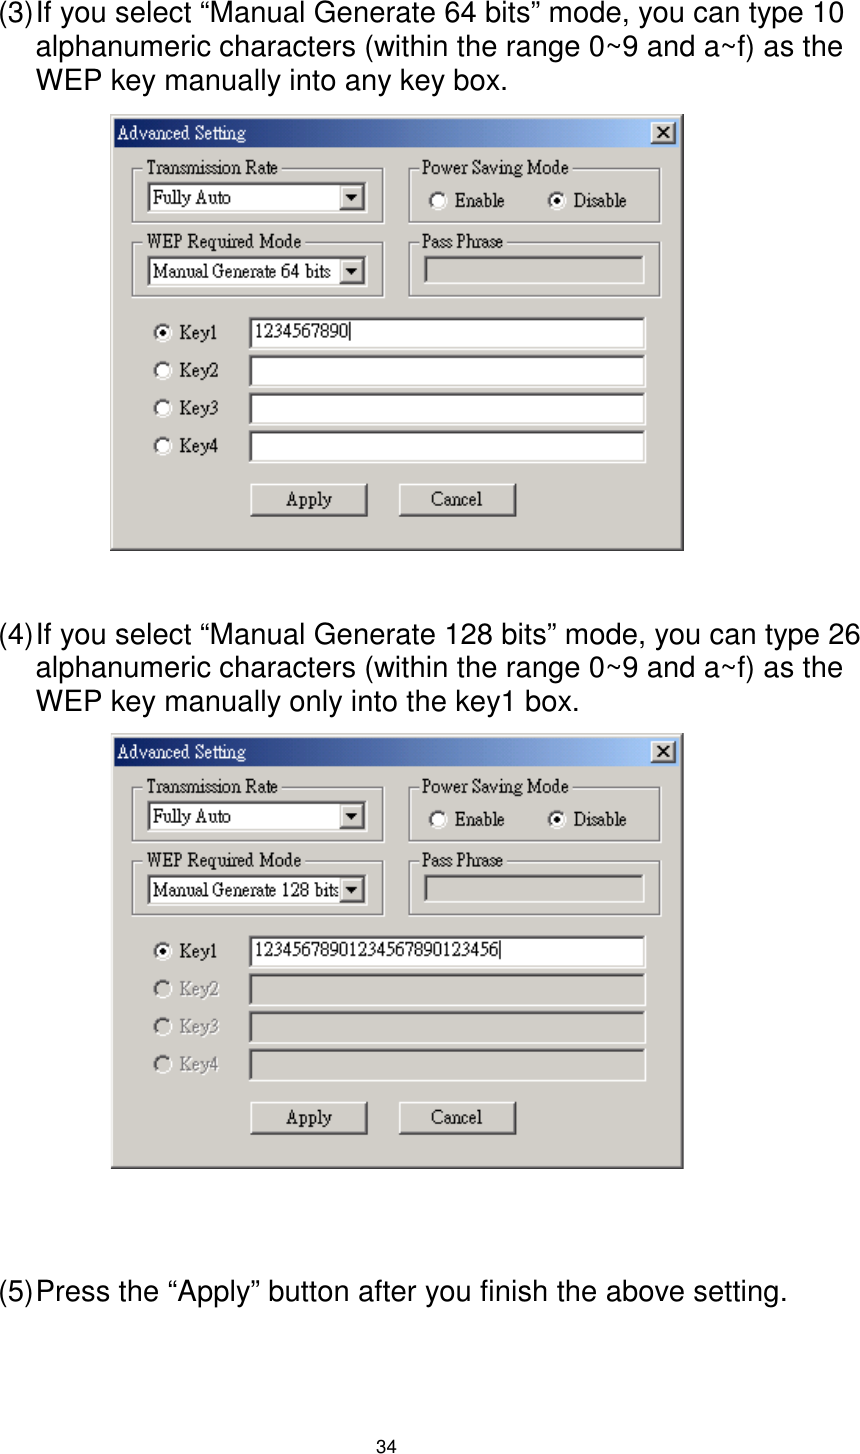  34 (3) If you select “Manual Generate 64 bits” mode, you can type 10 alphanumeric characters (within the range 0~9 and a~f) as the WEP key manually into any key box.               (4) If you select “Manual Generate 128 bits” mode, you can type 26 alphanumeric characters (within the range 0~9 and a~f) as the WEP key manually only into the key1 box.                (5) Press the “Apply” button after you finish the above setting. 